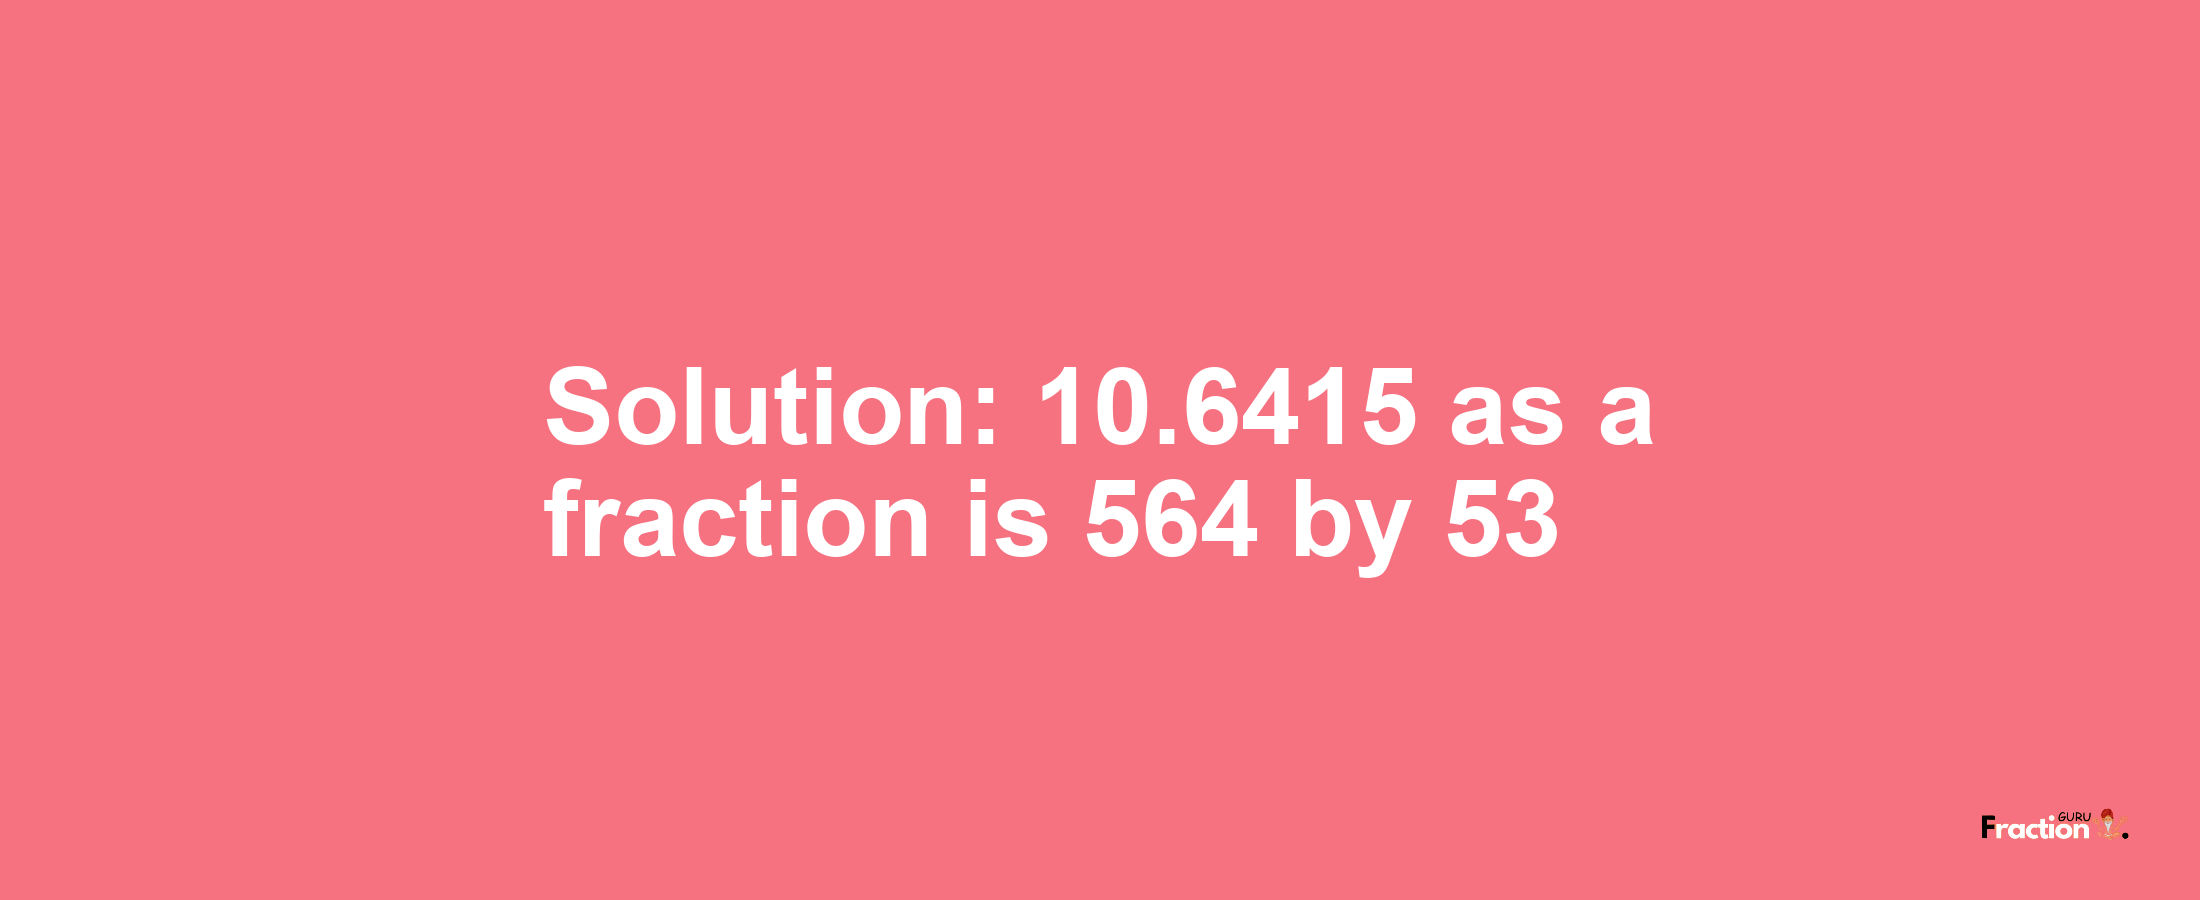 Solution:10.6415 as a fraction is 564/53